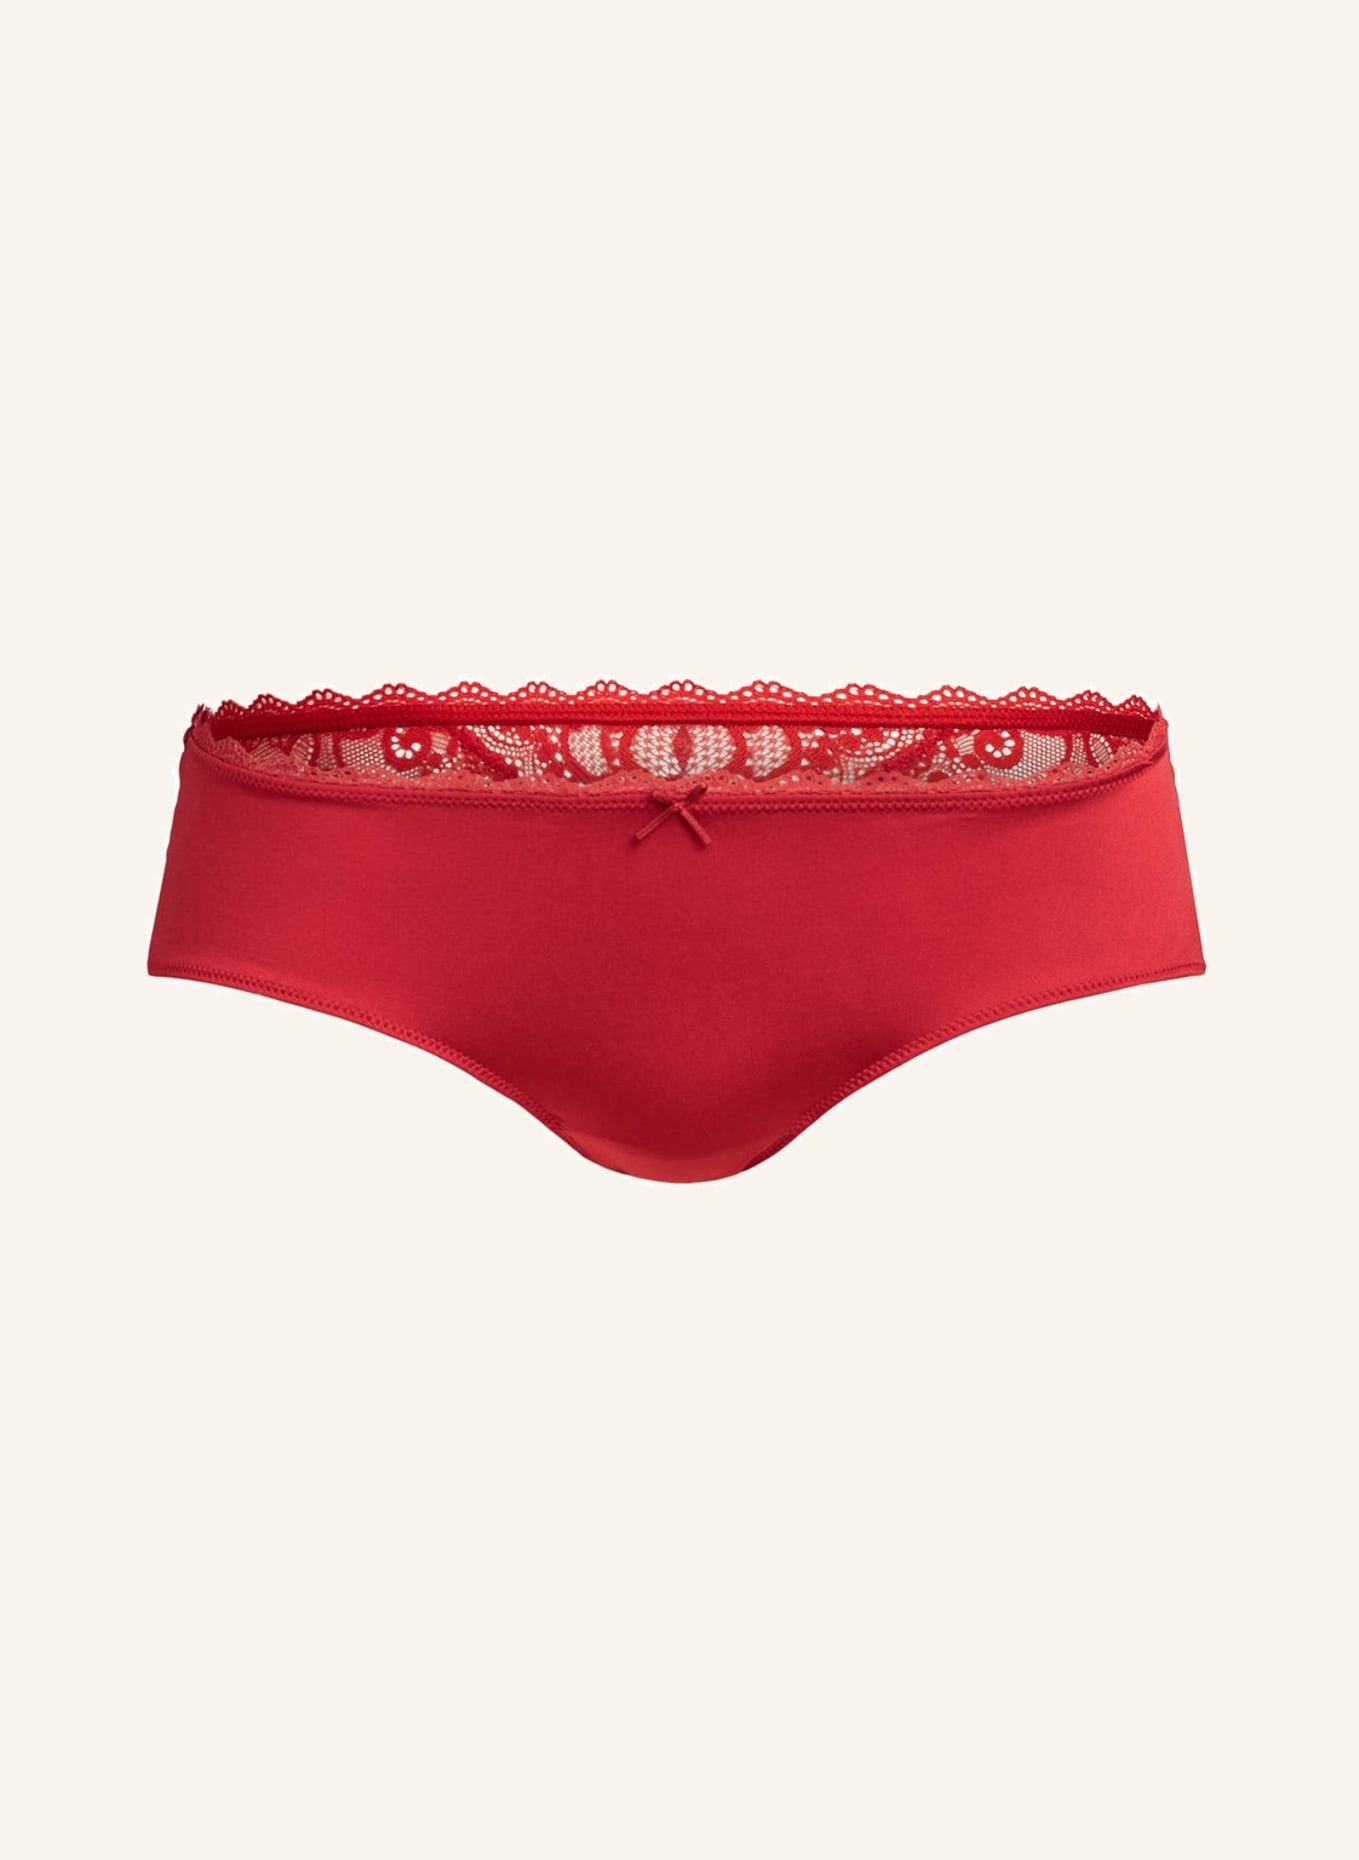 mey Panty series AMOROUS, Color: RED (Image 1)